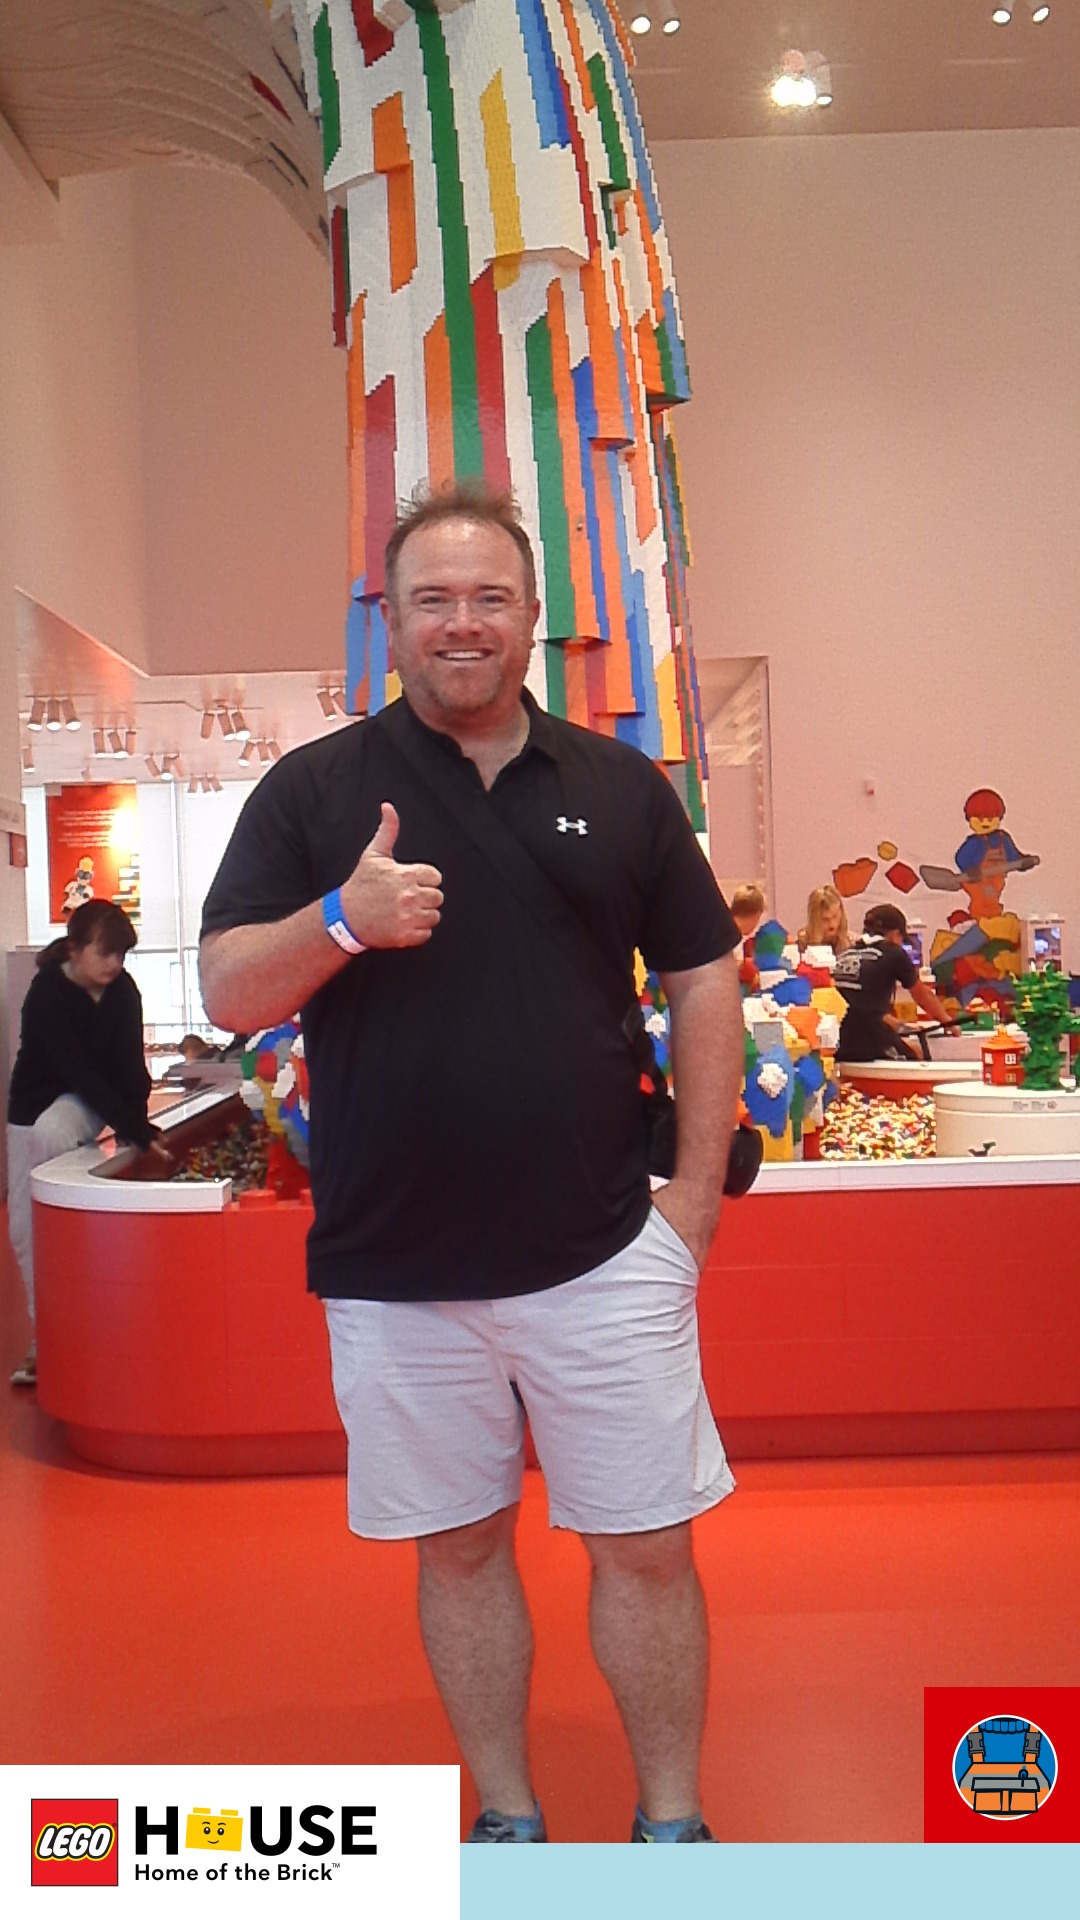 a man giving a thumbs up in a room with colorful legos